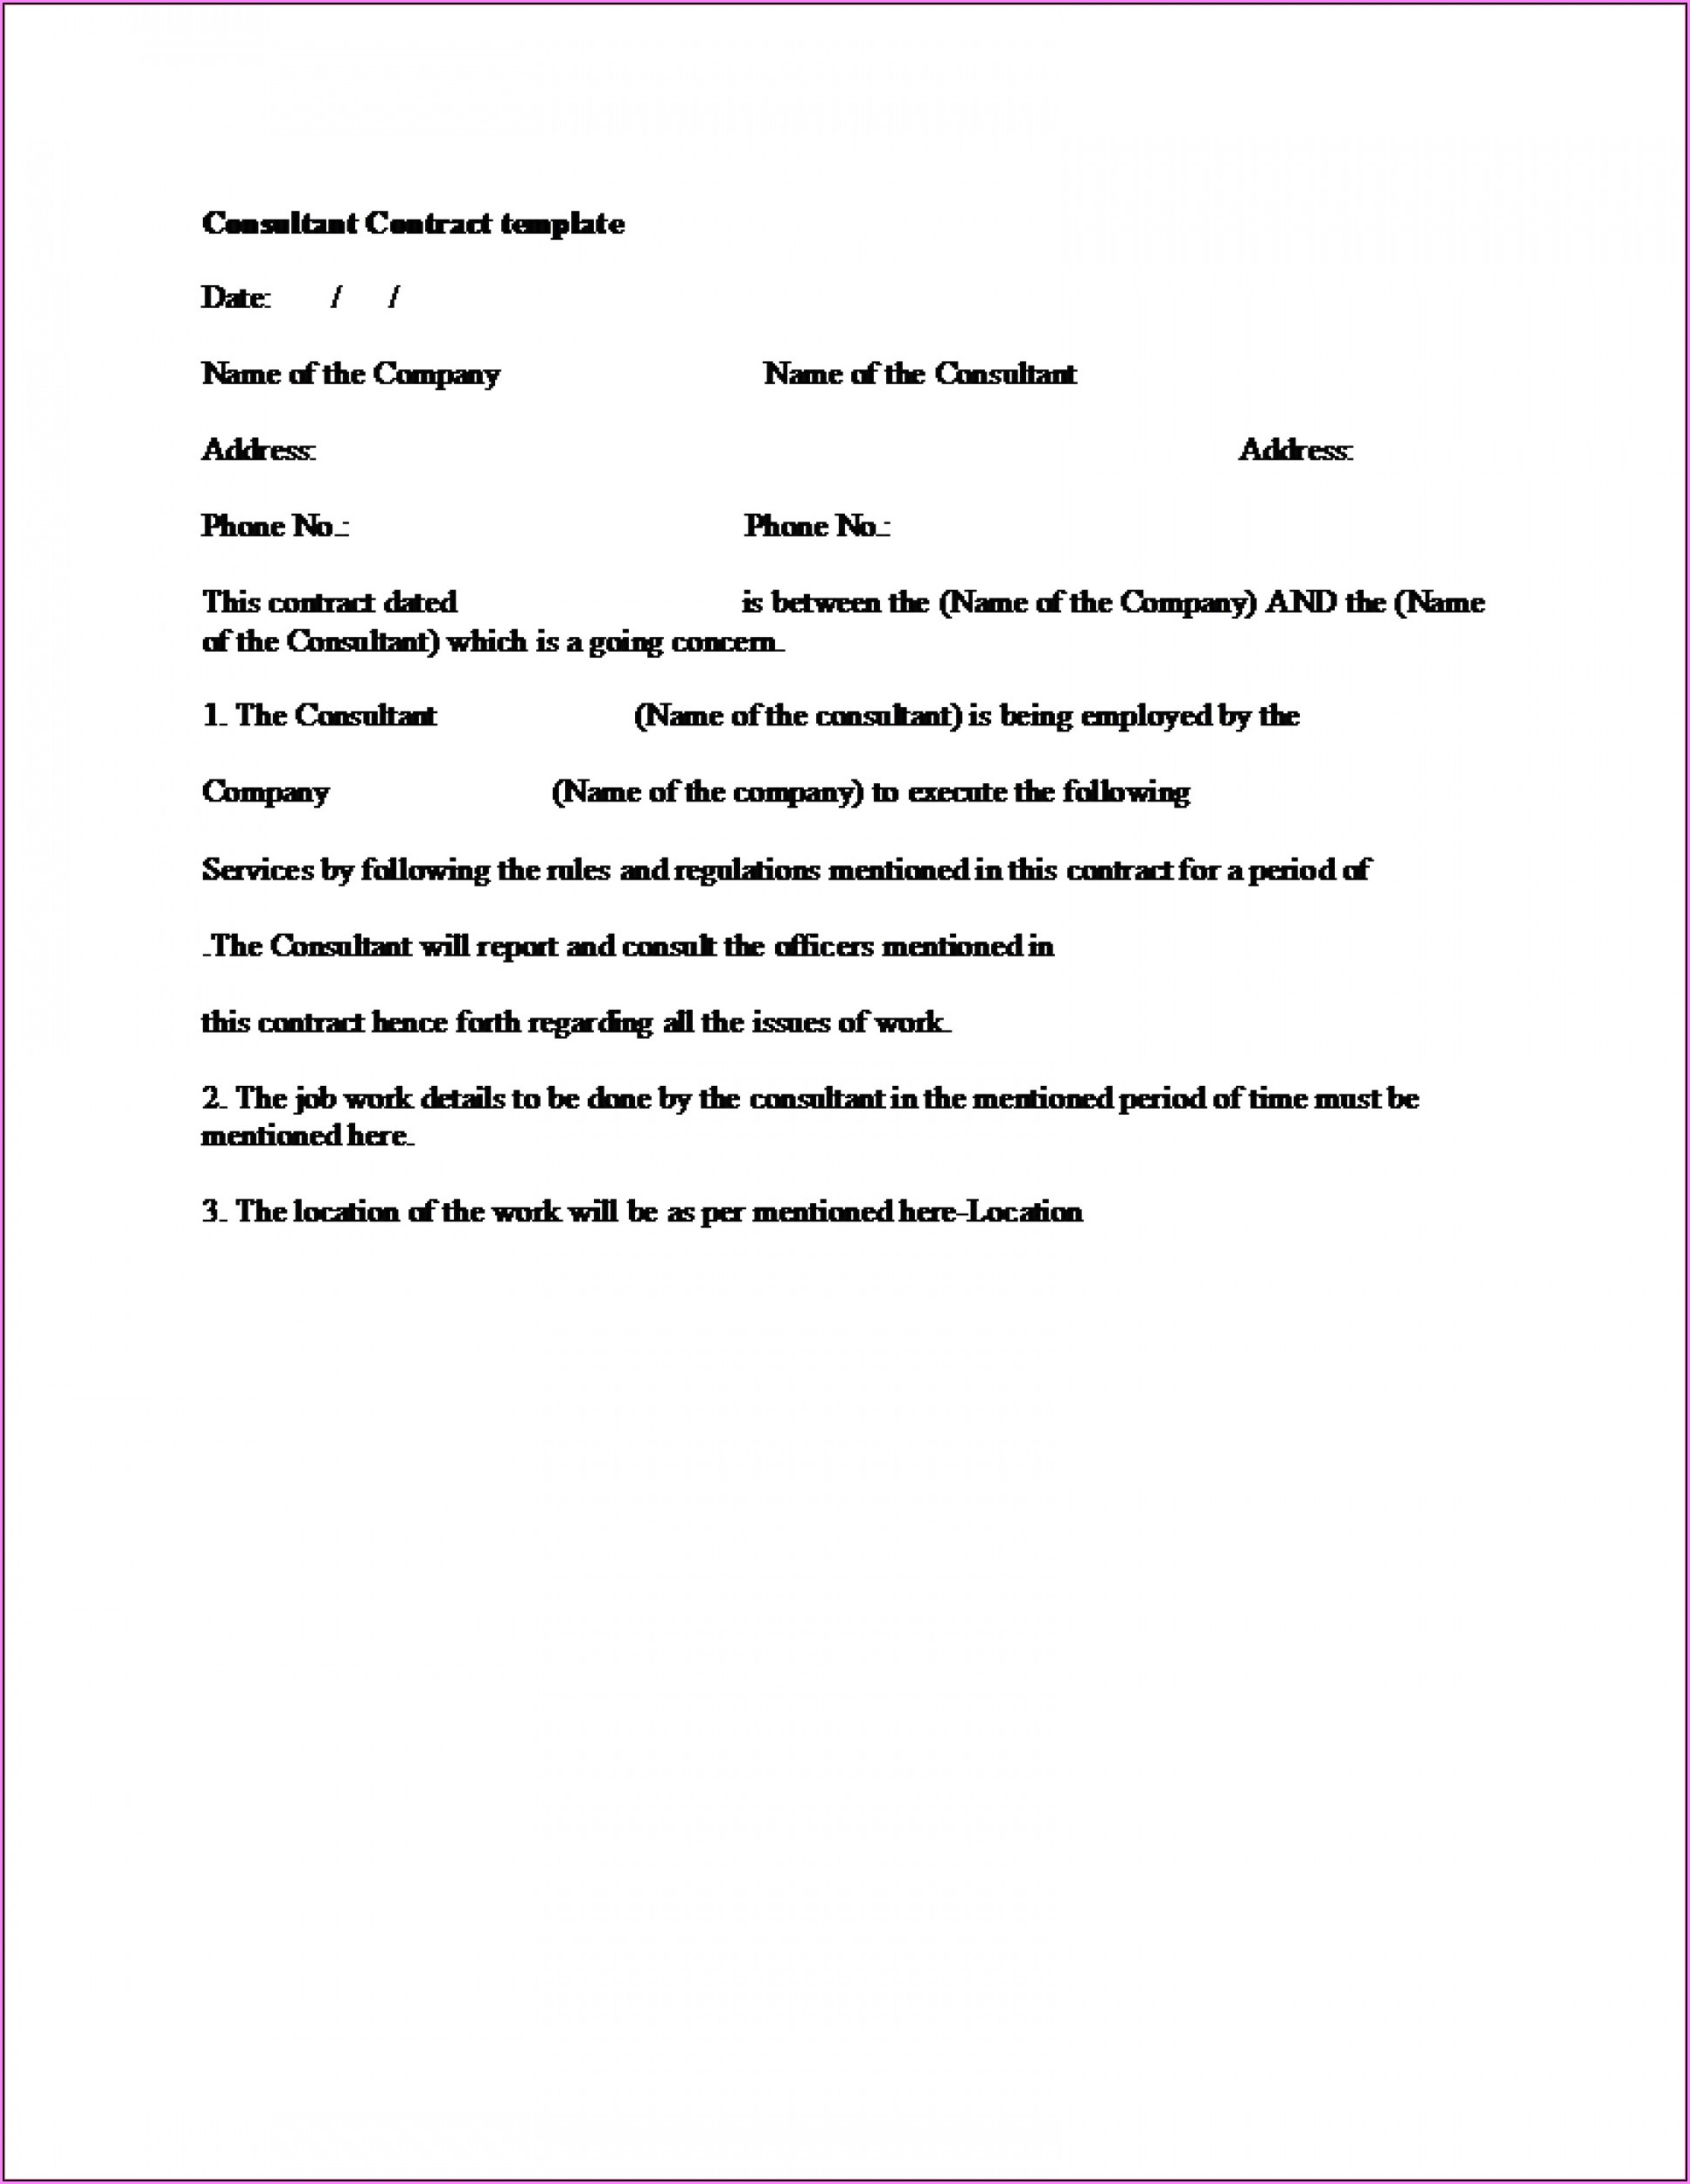 Consultant Agreement Template Free